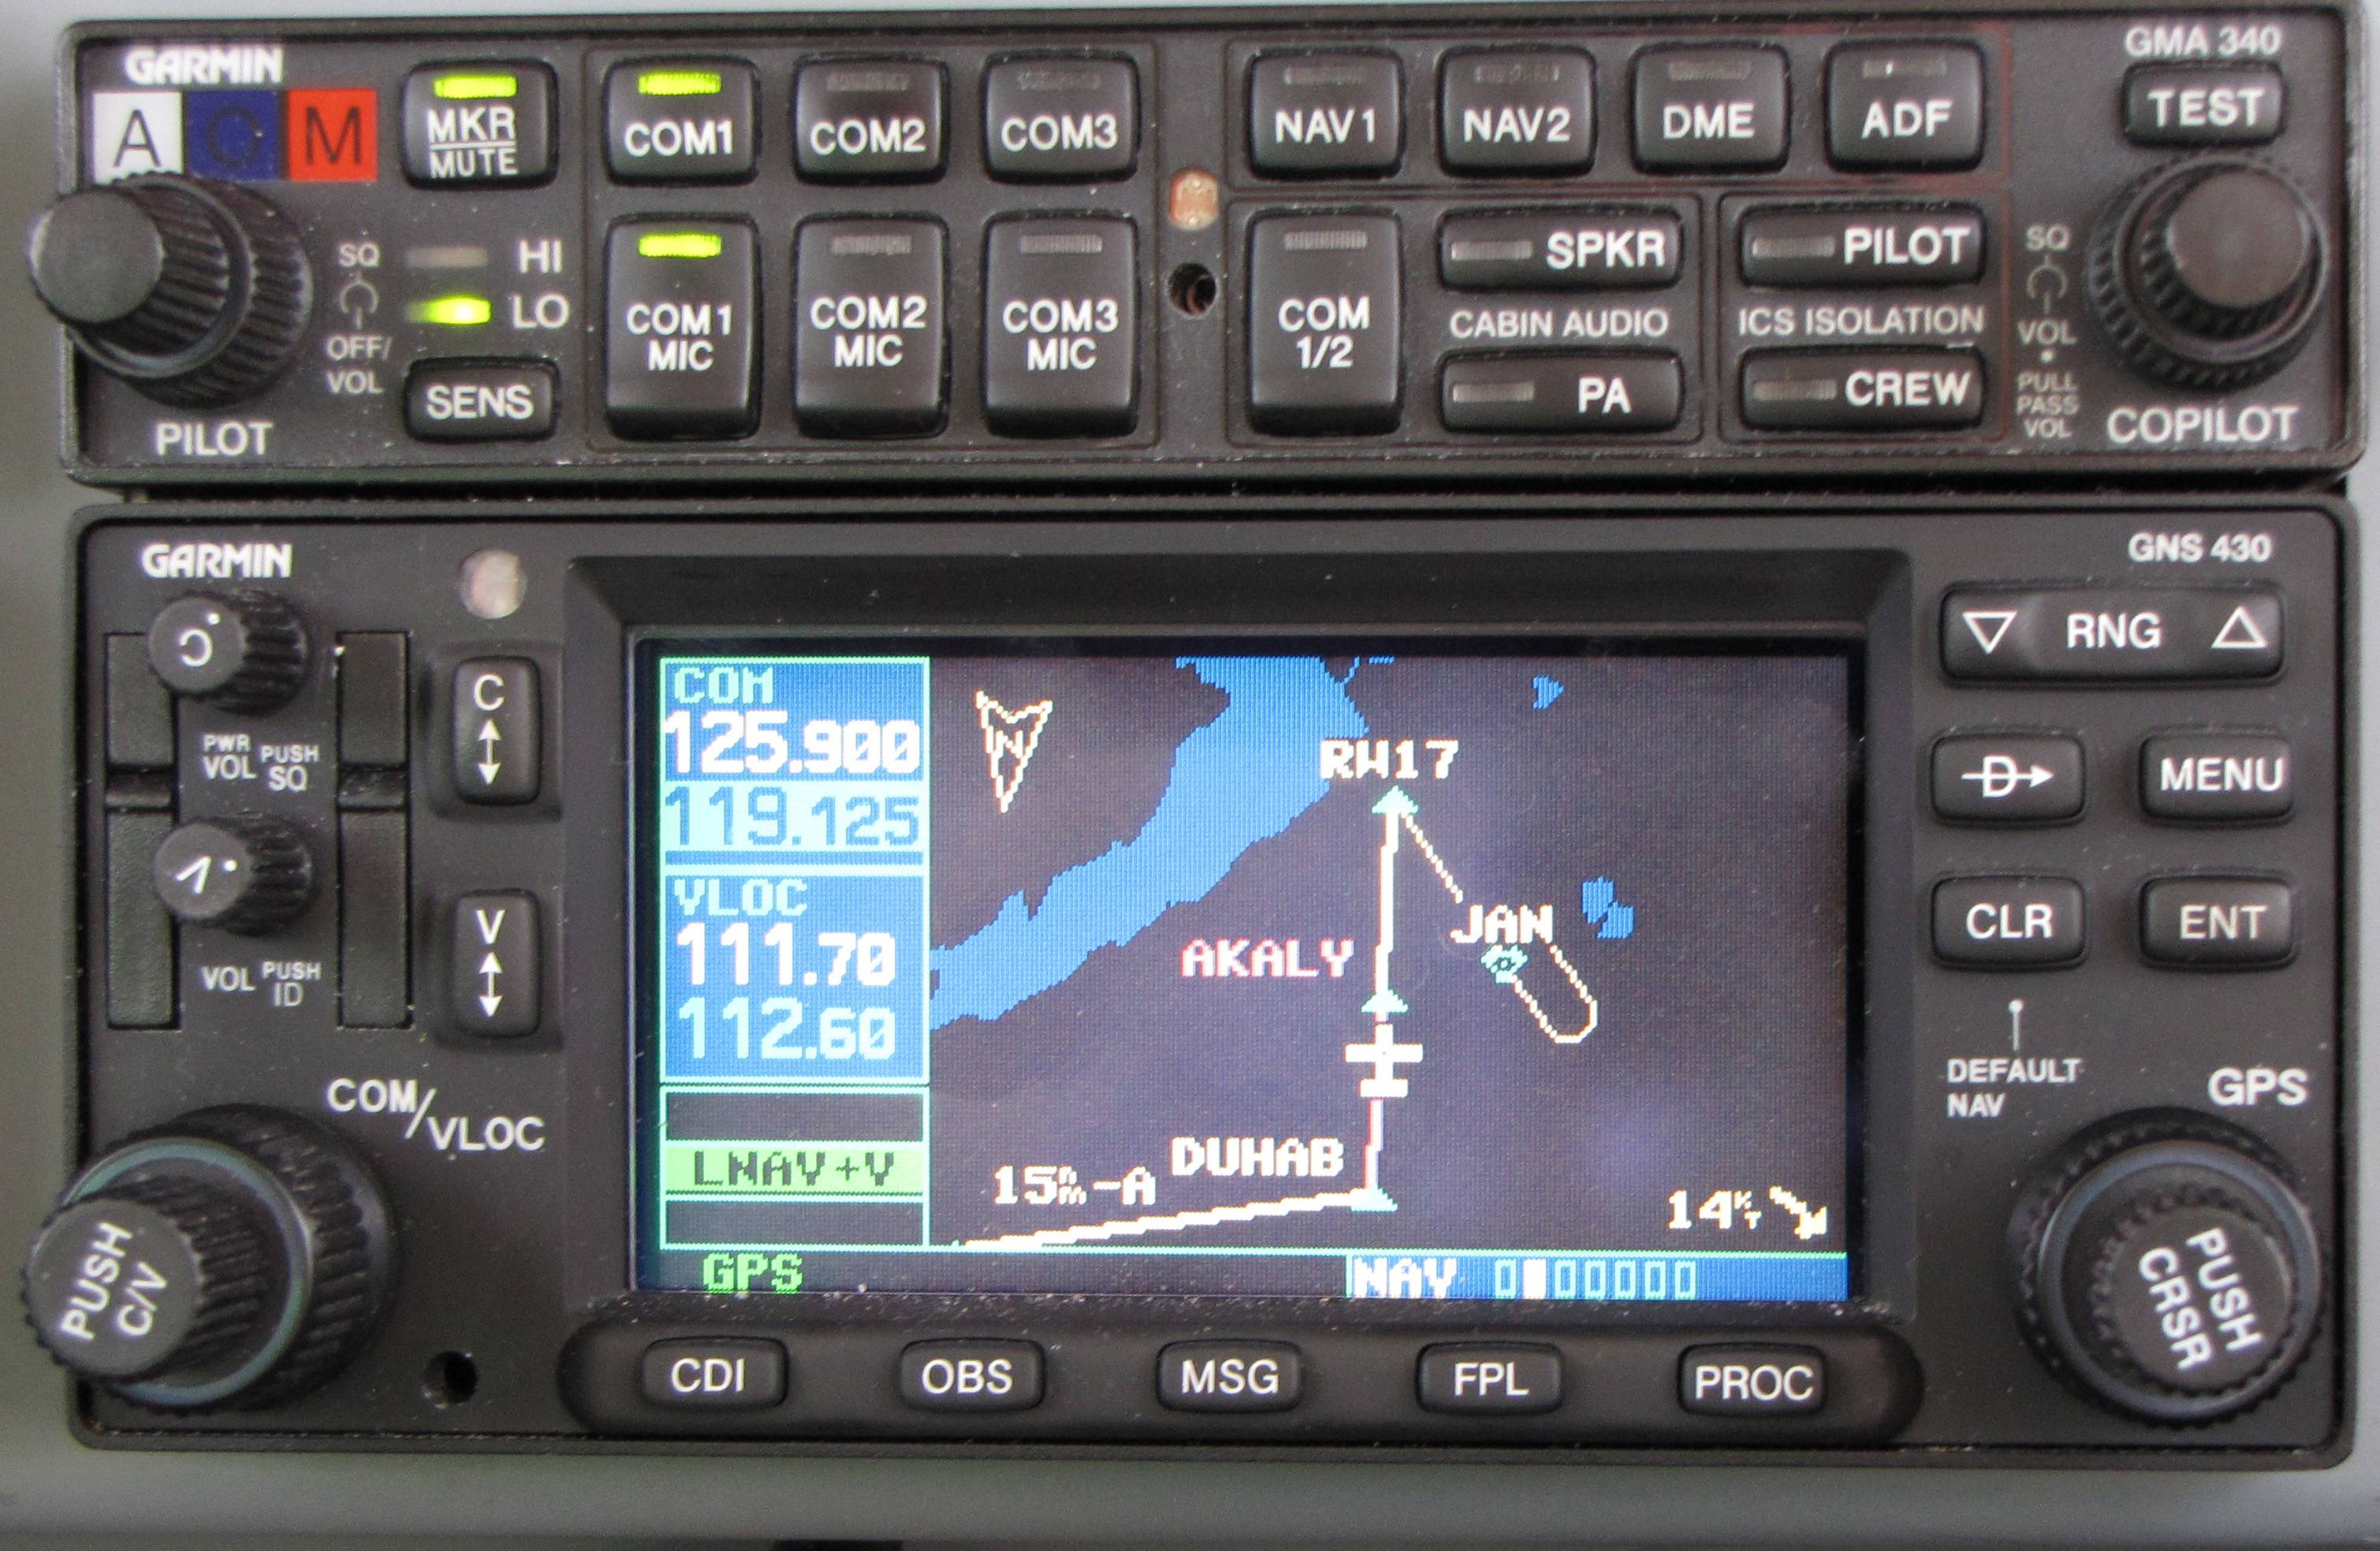 Best Aviation Radio: Top Picks For Clear And Reliable Communication